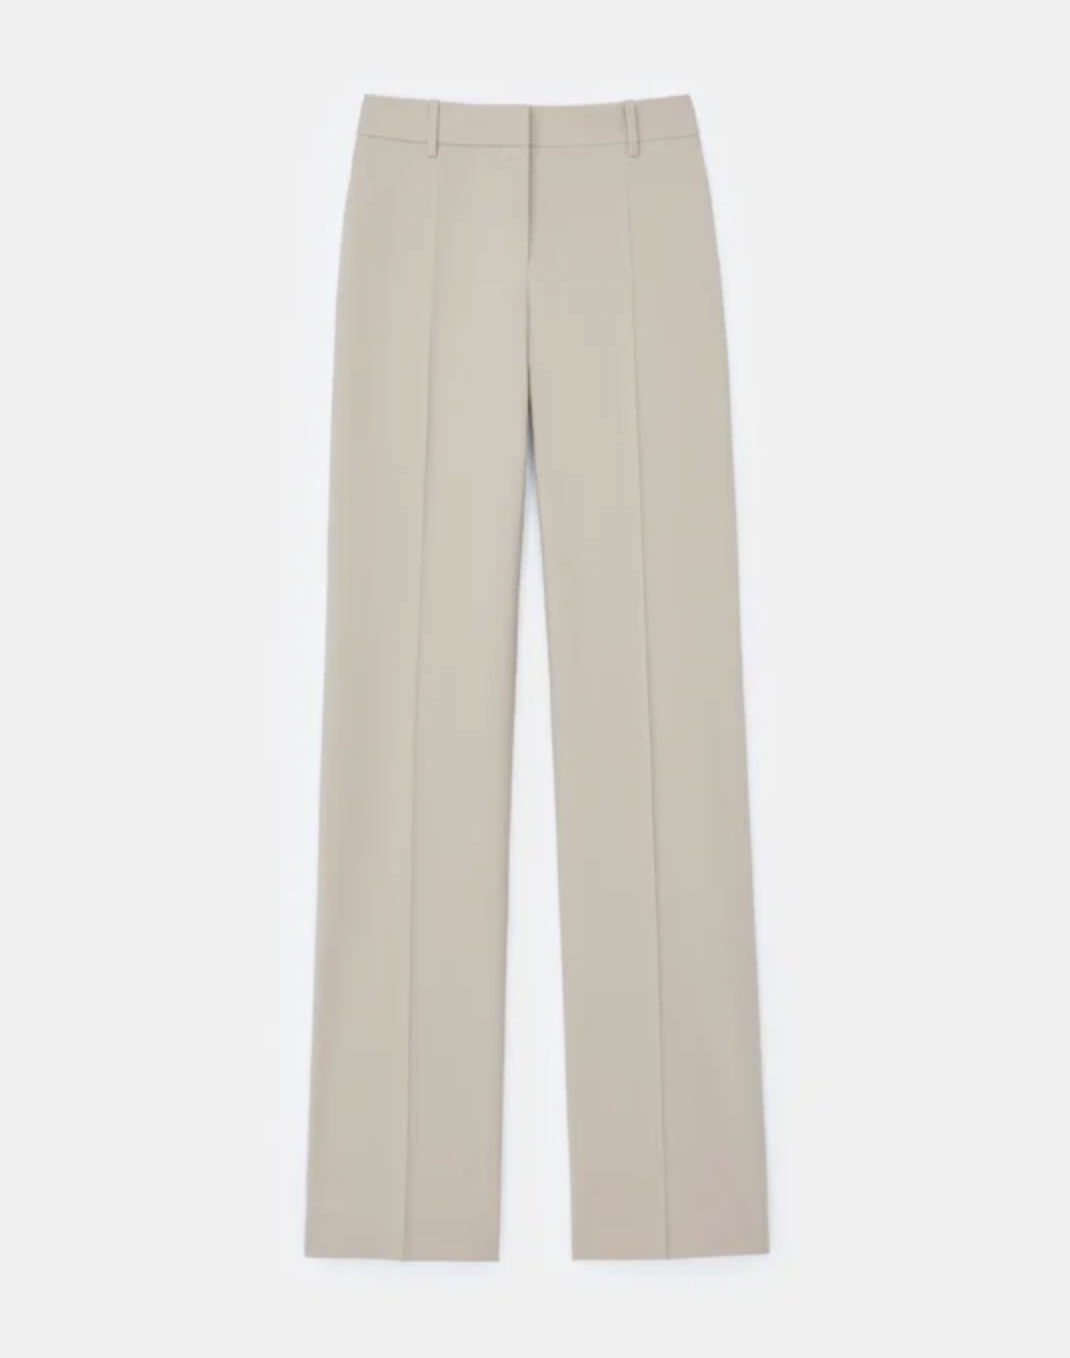 Women's Mid-rise Relaxed Straight Leg Chino Pants - A New Day™ : Target